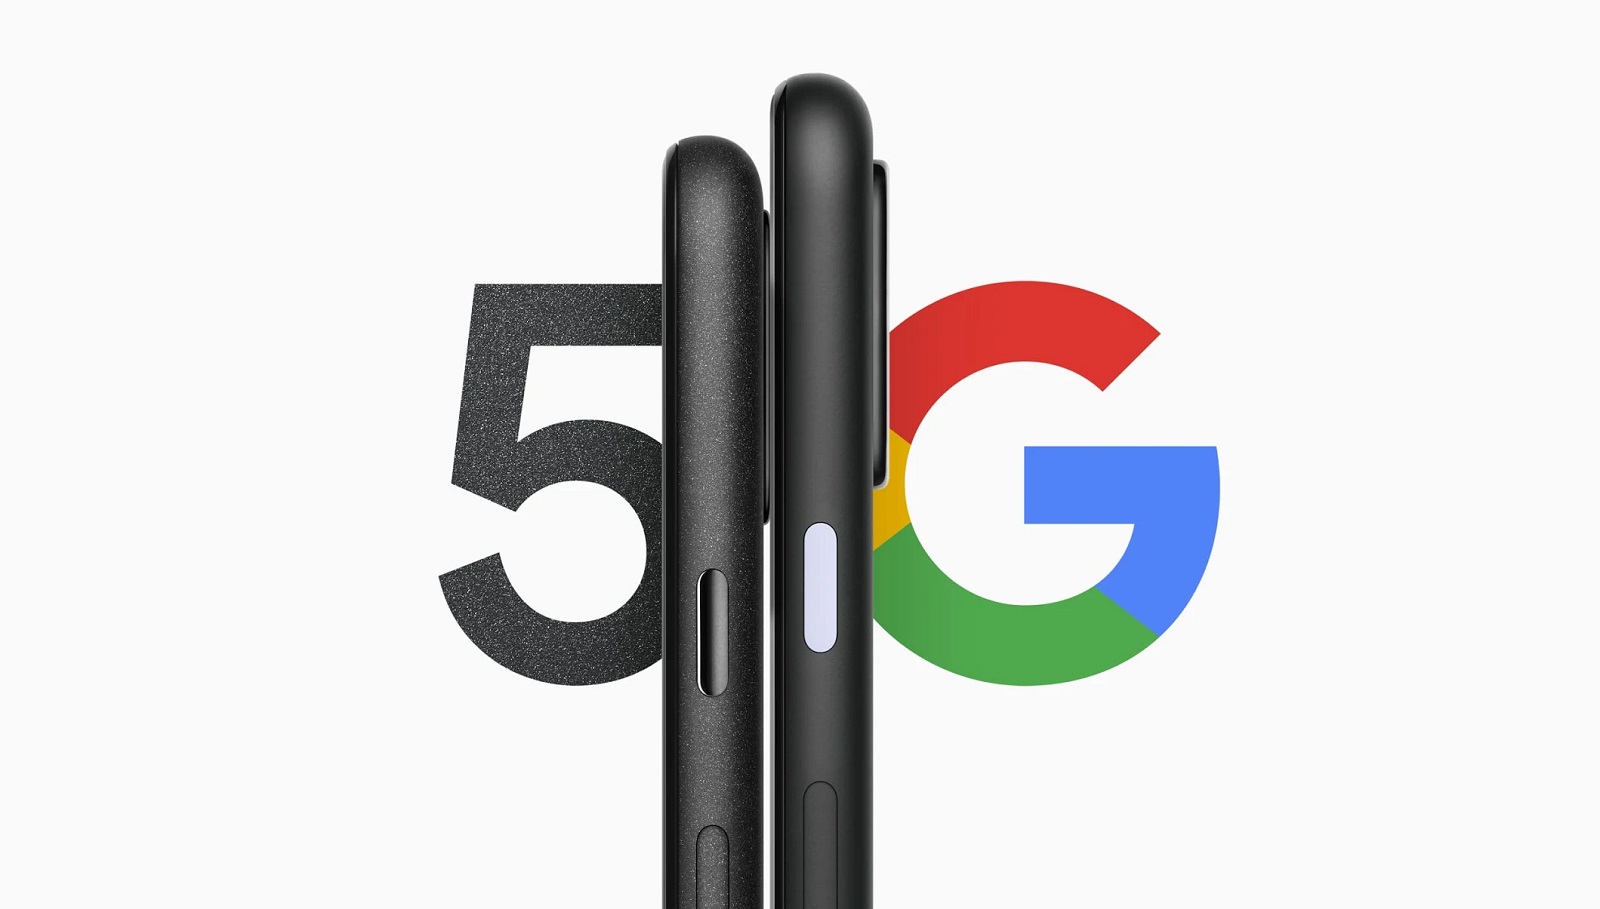 Google might power its Pixel 5a 5G with Snapdragon 765G SoC - The 